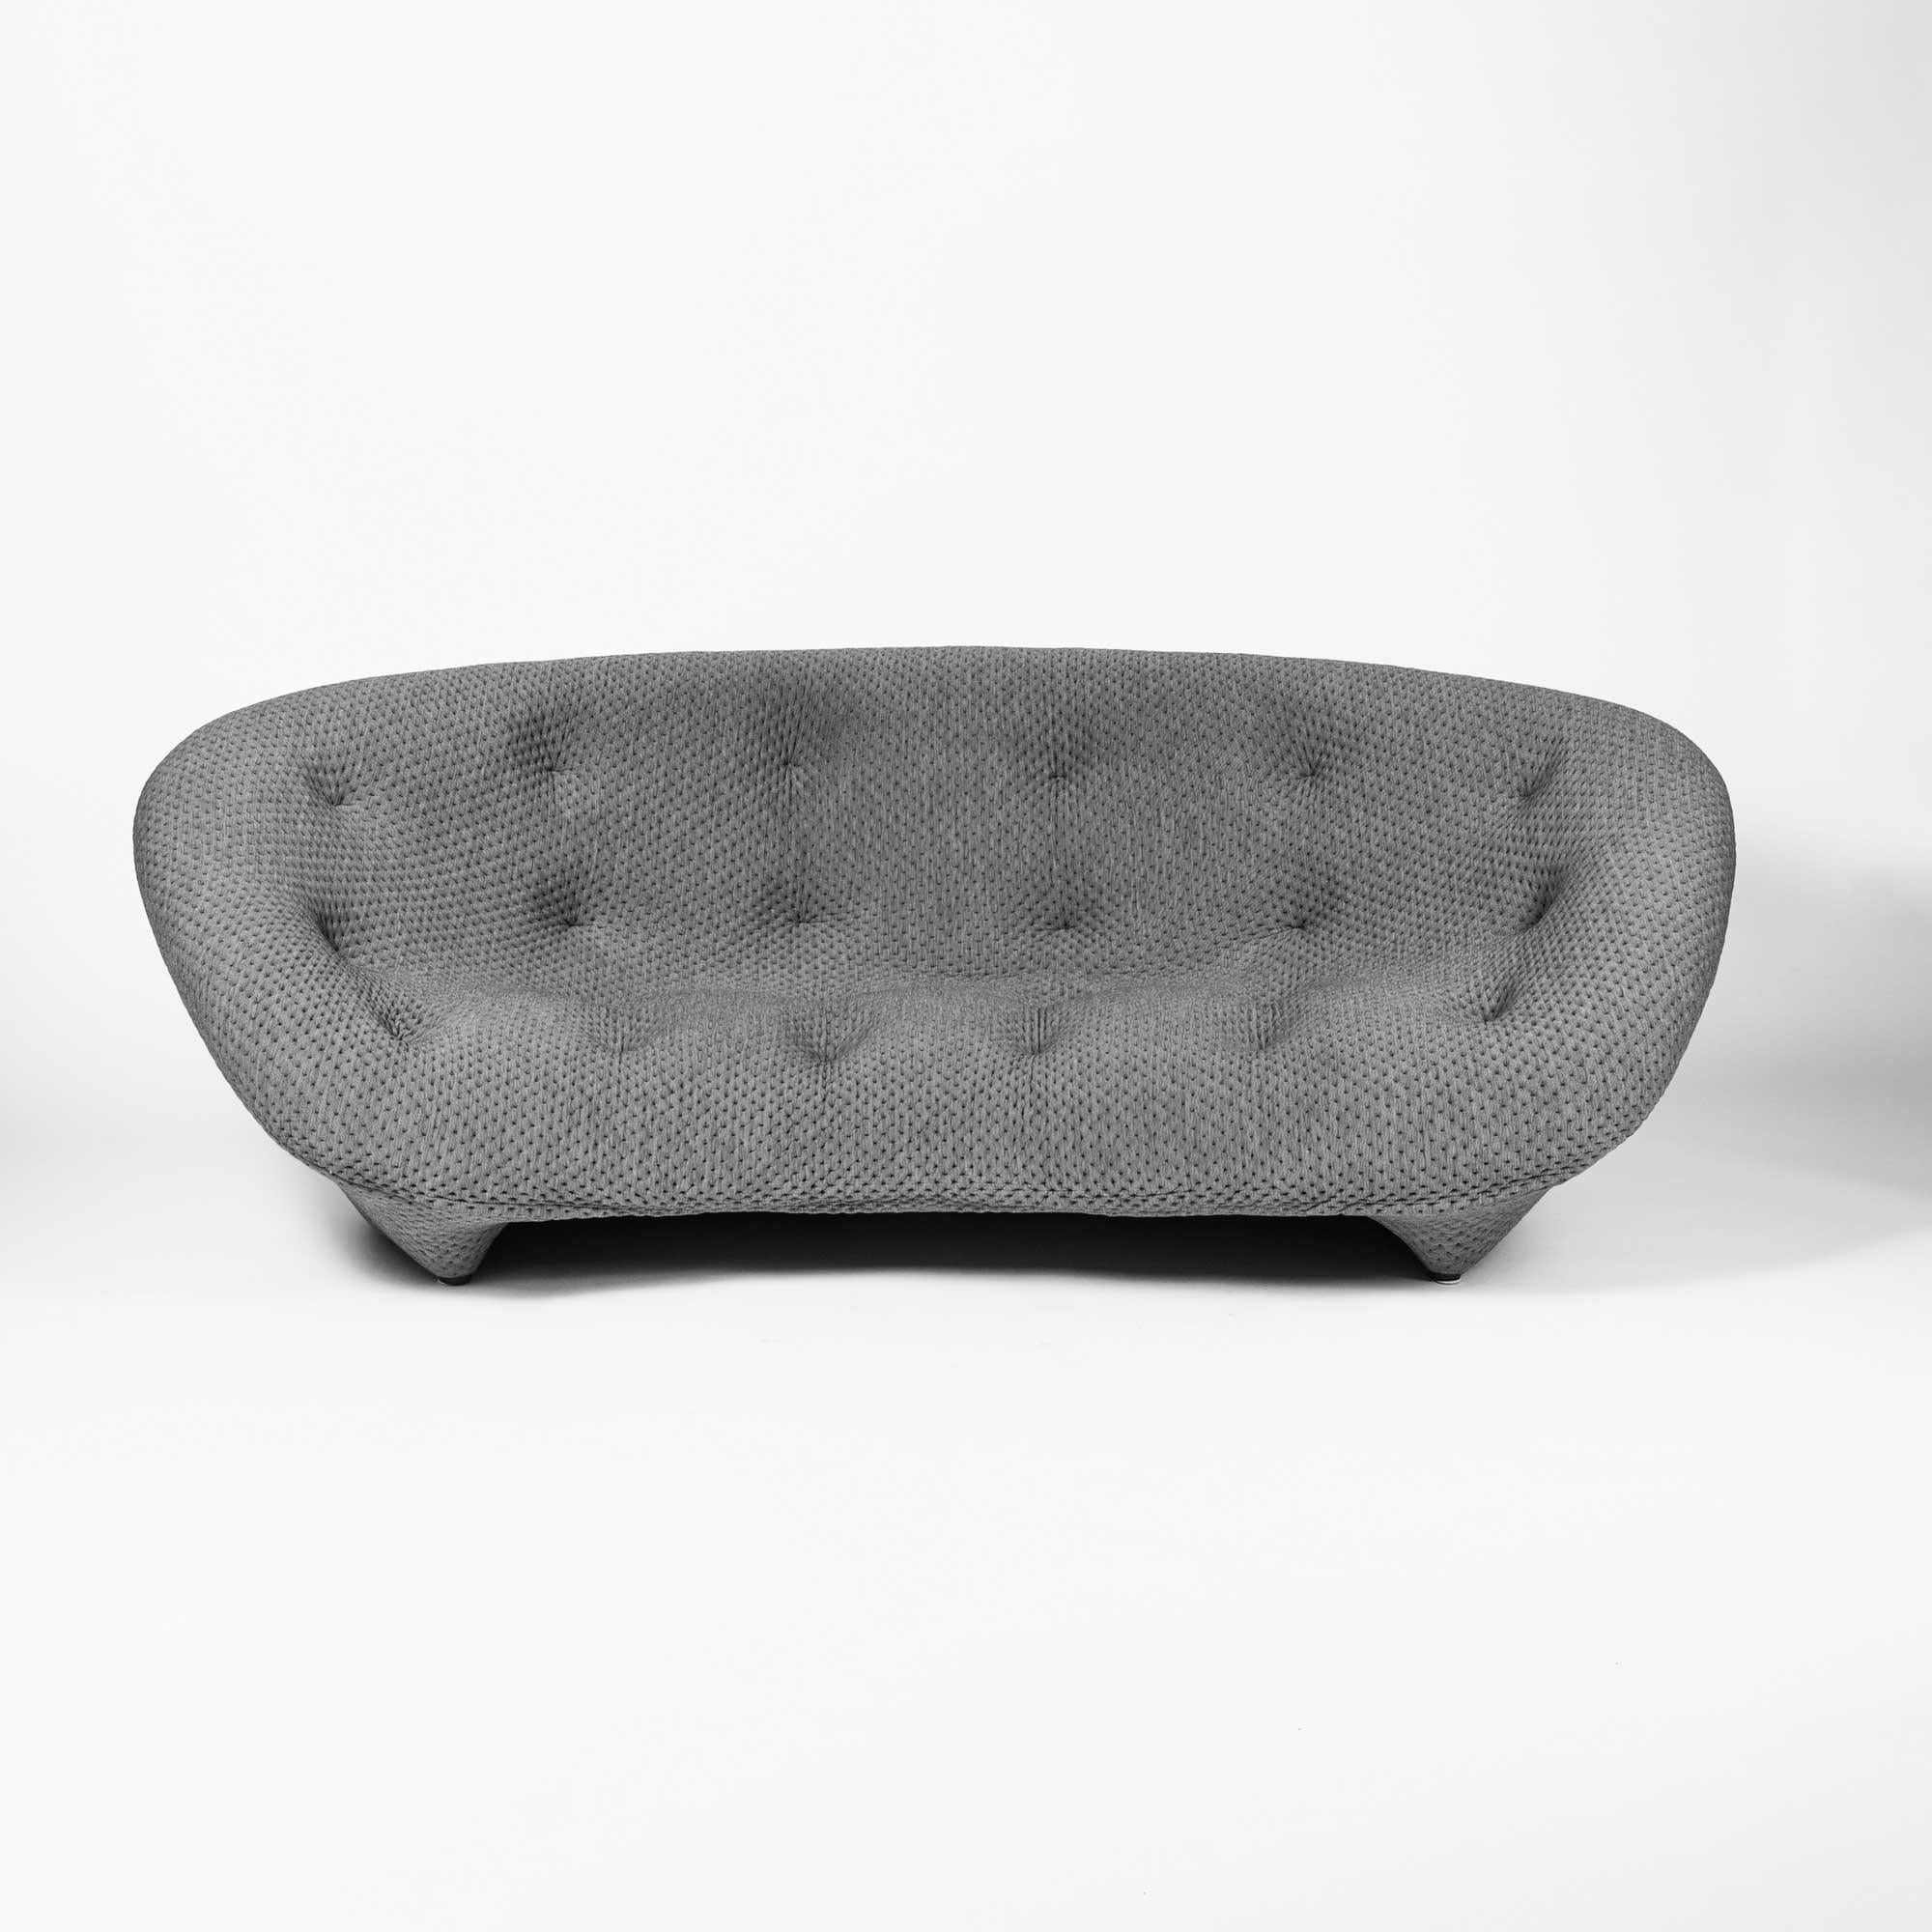 The Ploum seating is the fruit of much research into comfort. The result is a special combination of two materials: a stretchable covering and ultra-soft foam. This combination, along with the Ploum sofas' truly ample dimensions, provides extreme